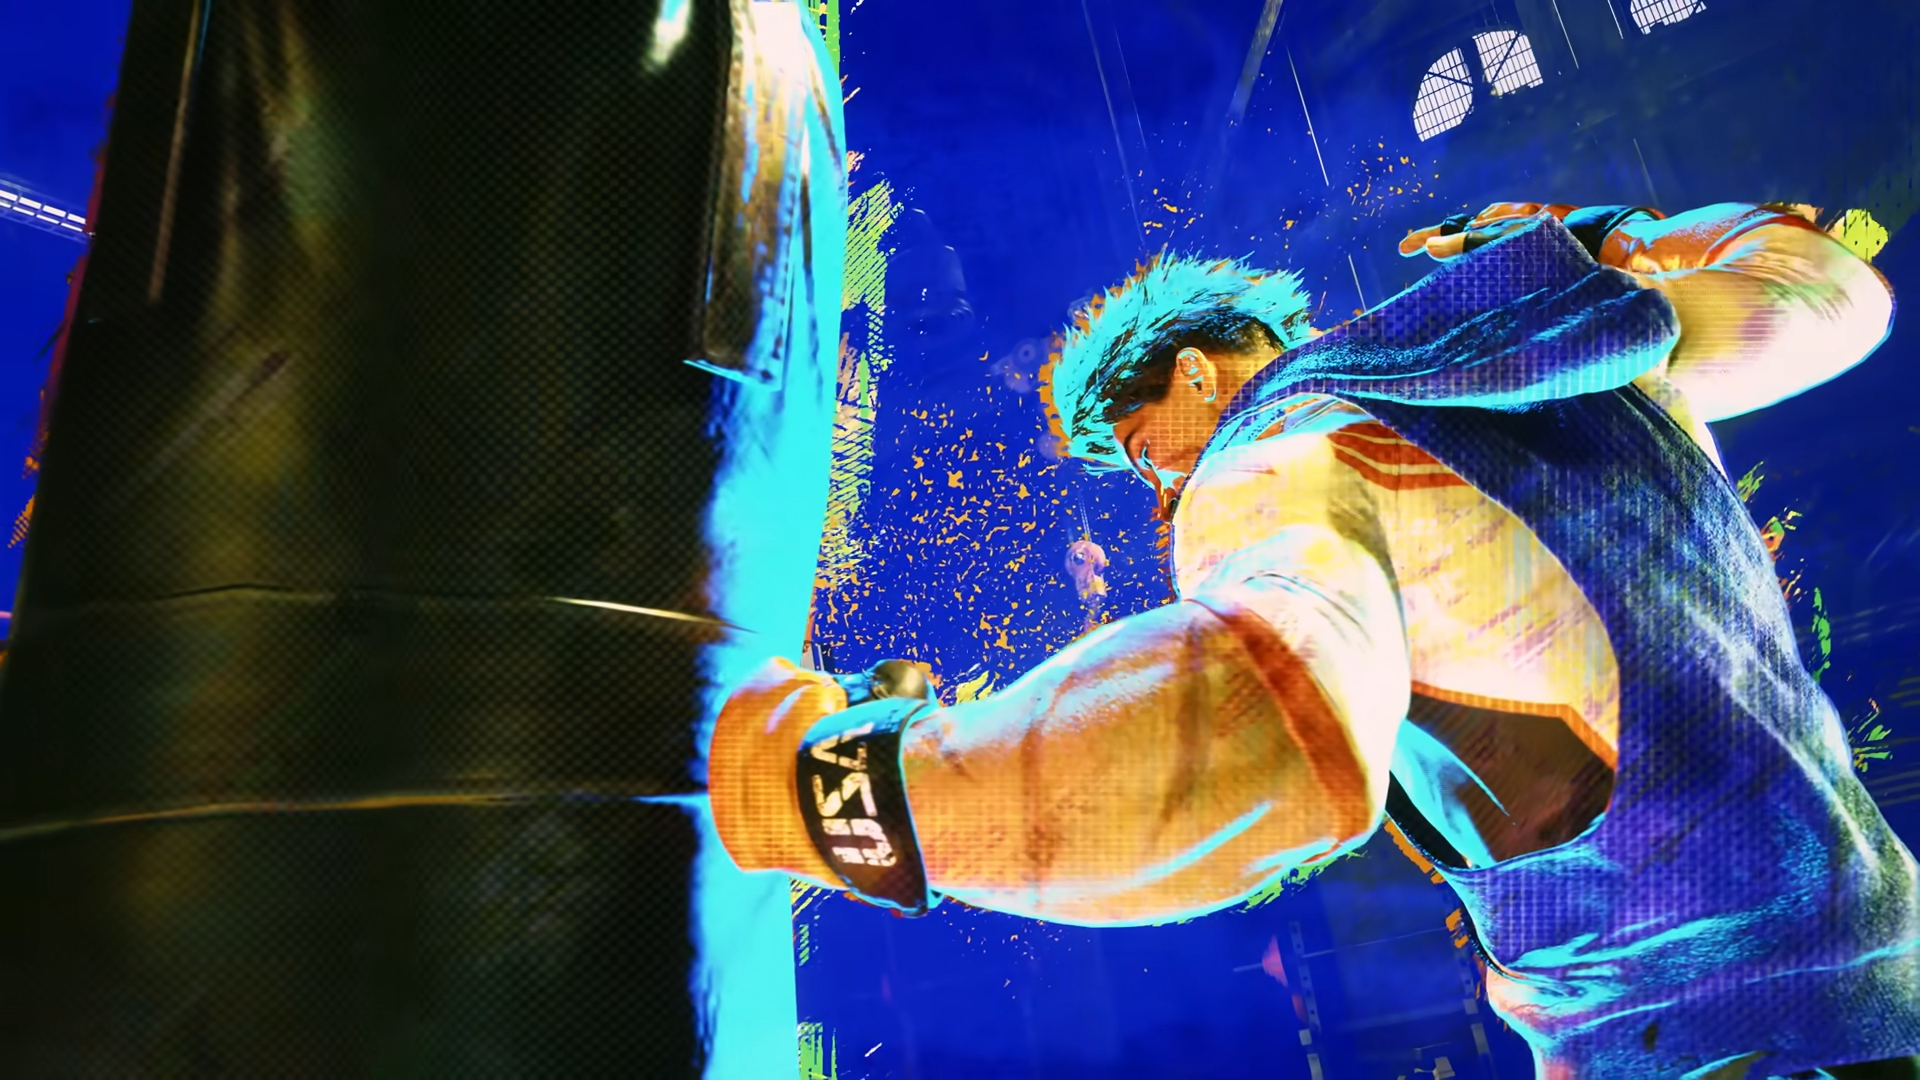 Exclusive: Listen to the Character Themes for 'Street Fighter 6